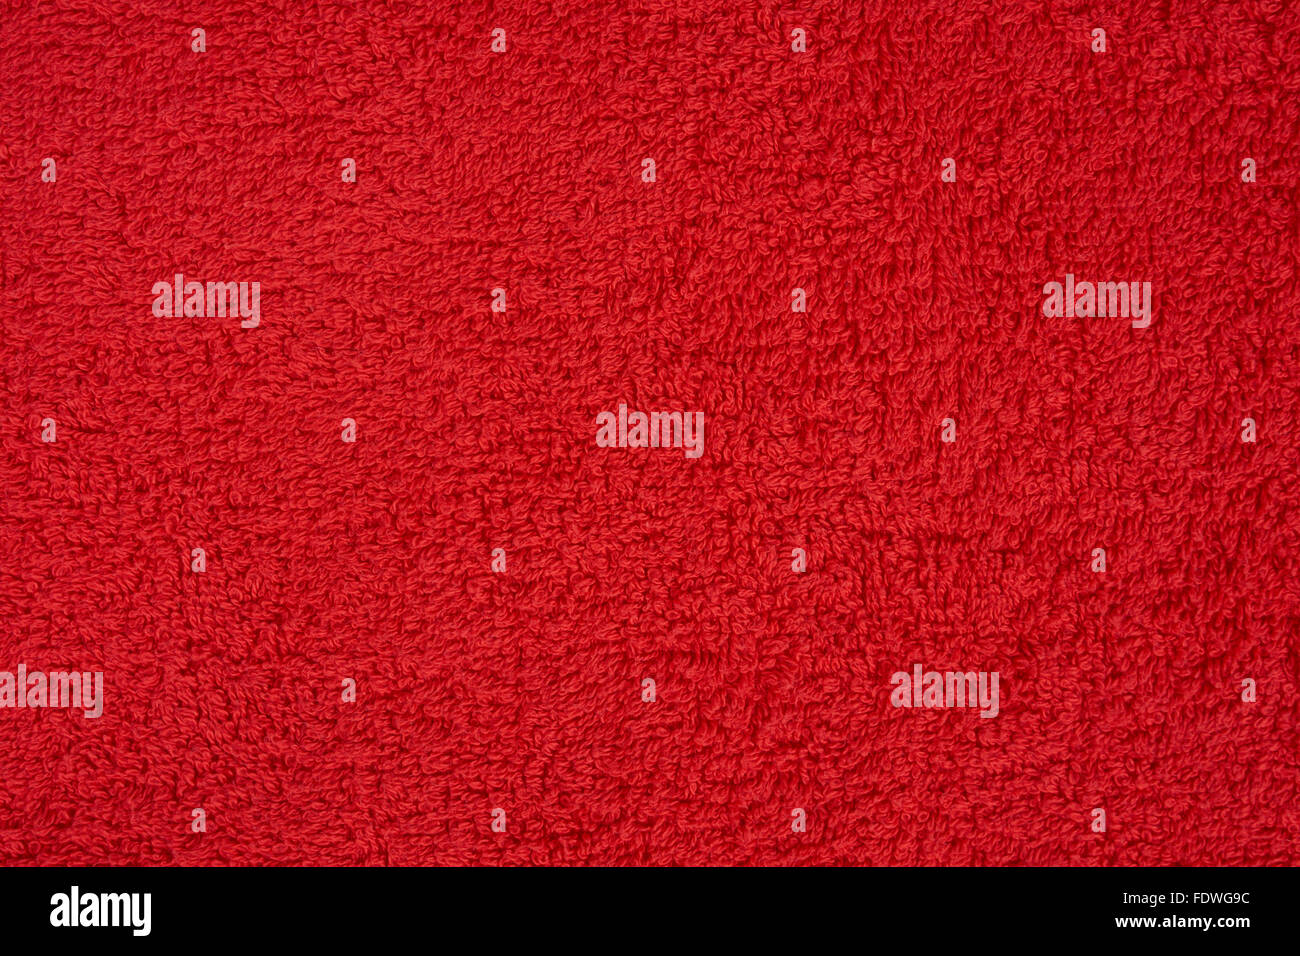 Red terry towel as a seamless background Stock Photo